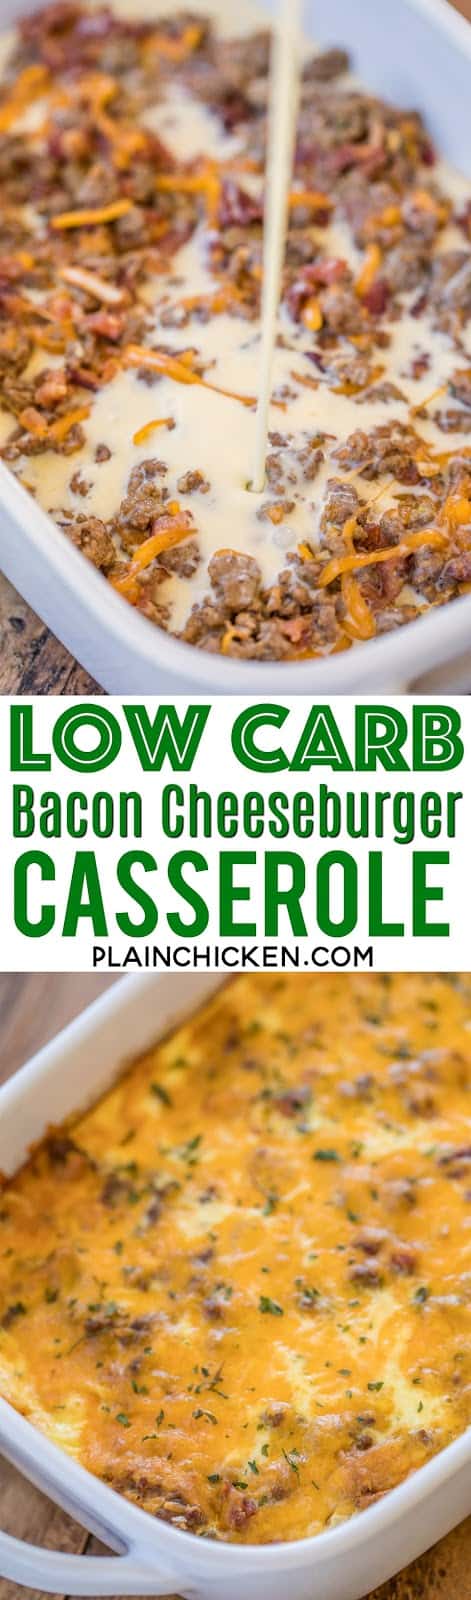 Low Carb Bacon Cheeseburger Casserole - low on carbs but high on taste! SO good! Everyone cleaned their plate and asked for seconds!! Ground beef, bacon, ketchup, mustard, onion, Ranch, cheddar cheese, eggs, milk and sour cream. It is like a quiche without the crust. Ready in 30 minutes. Can make ahead and refrigerate or freeze for later. #casserole #freezermeal